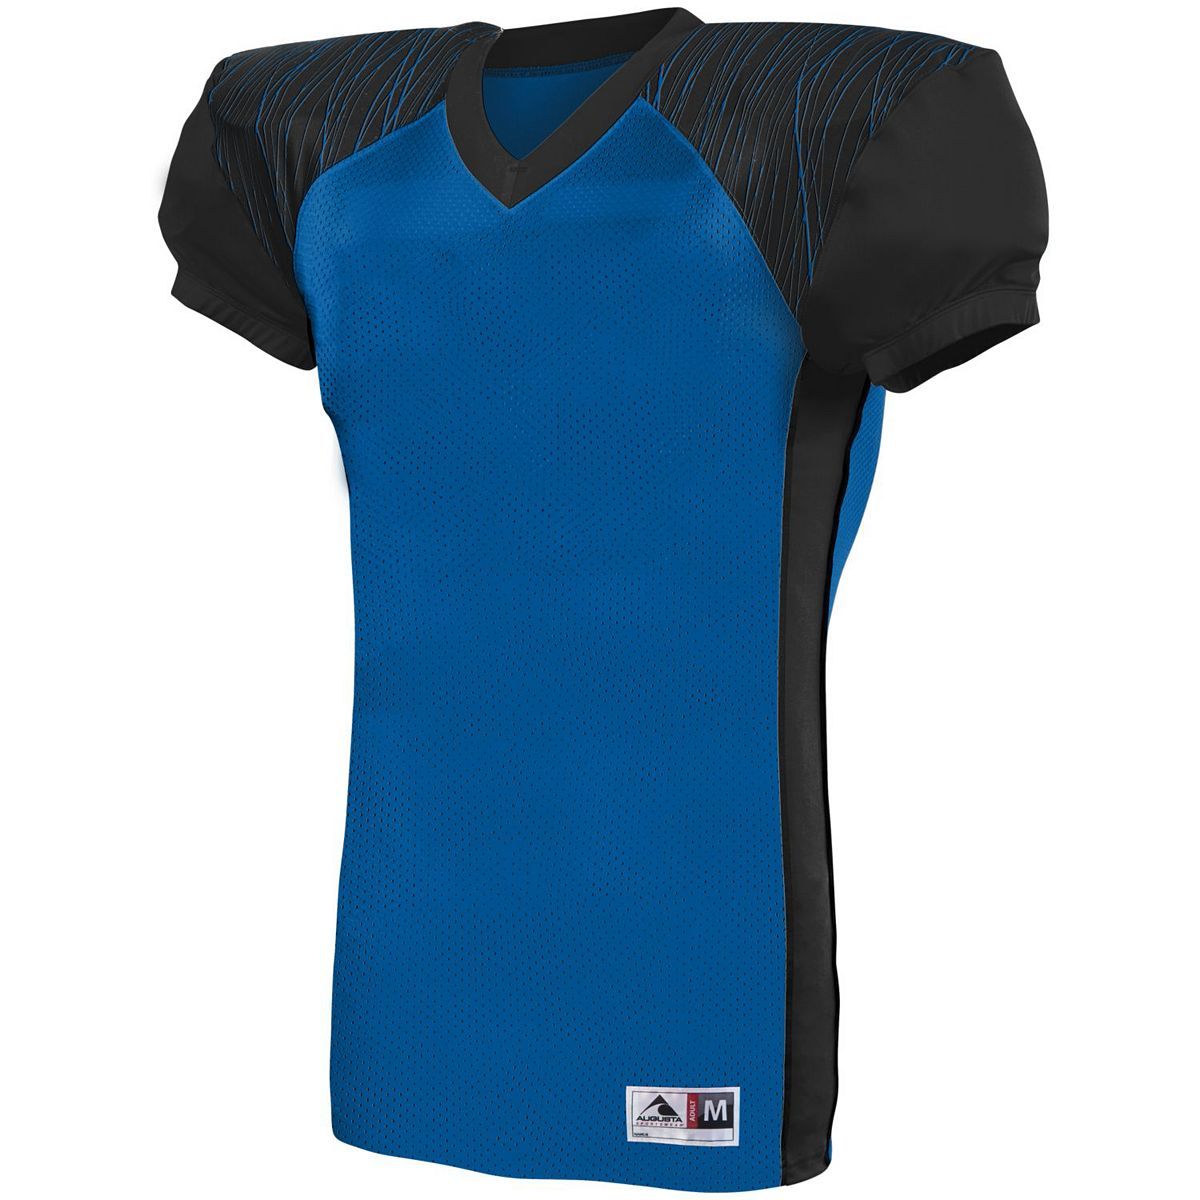 Augusta Sportswear Youth Zone Play Jersey in Royal/Black/Royal Print  -Part of the Youth, Youth-Jersey, Augusta-Products, Football, Shirts, All-Sports, All-Sports-1 product lines at KanaleyCreations.com